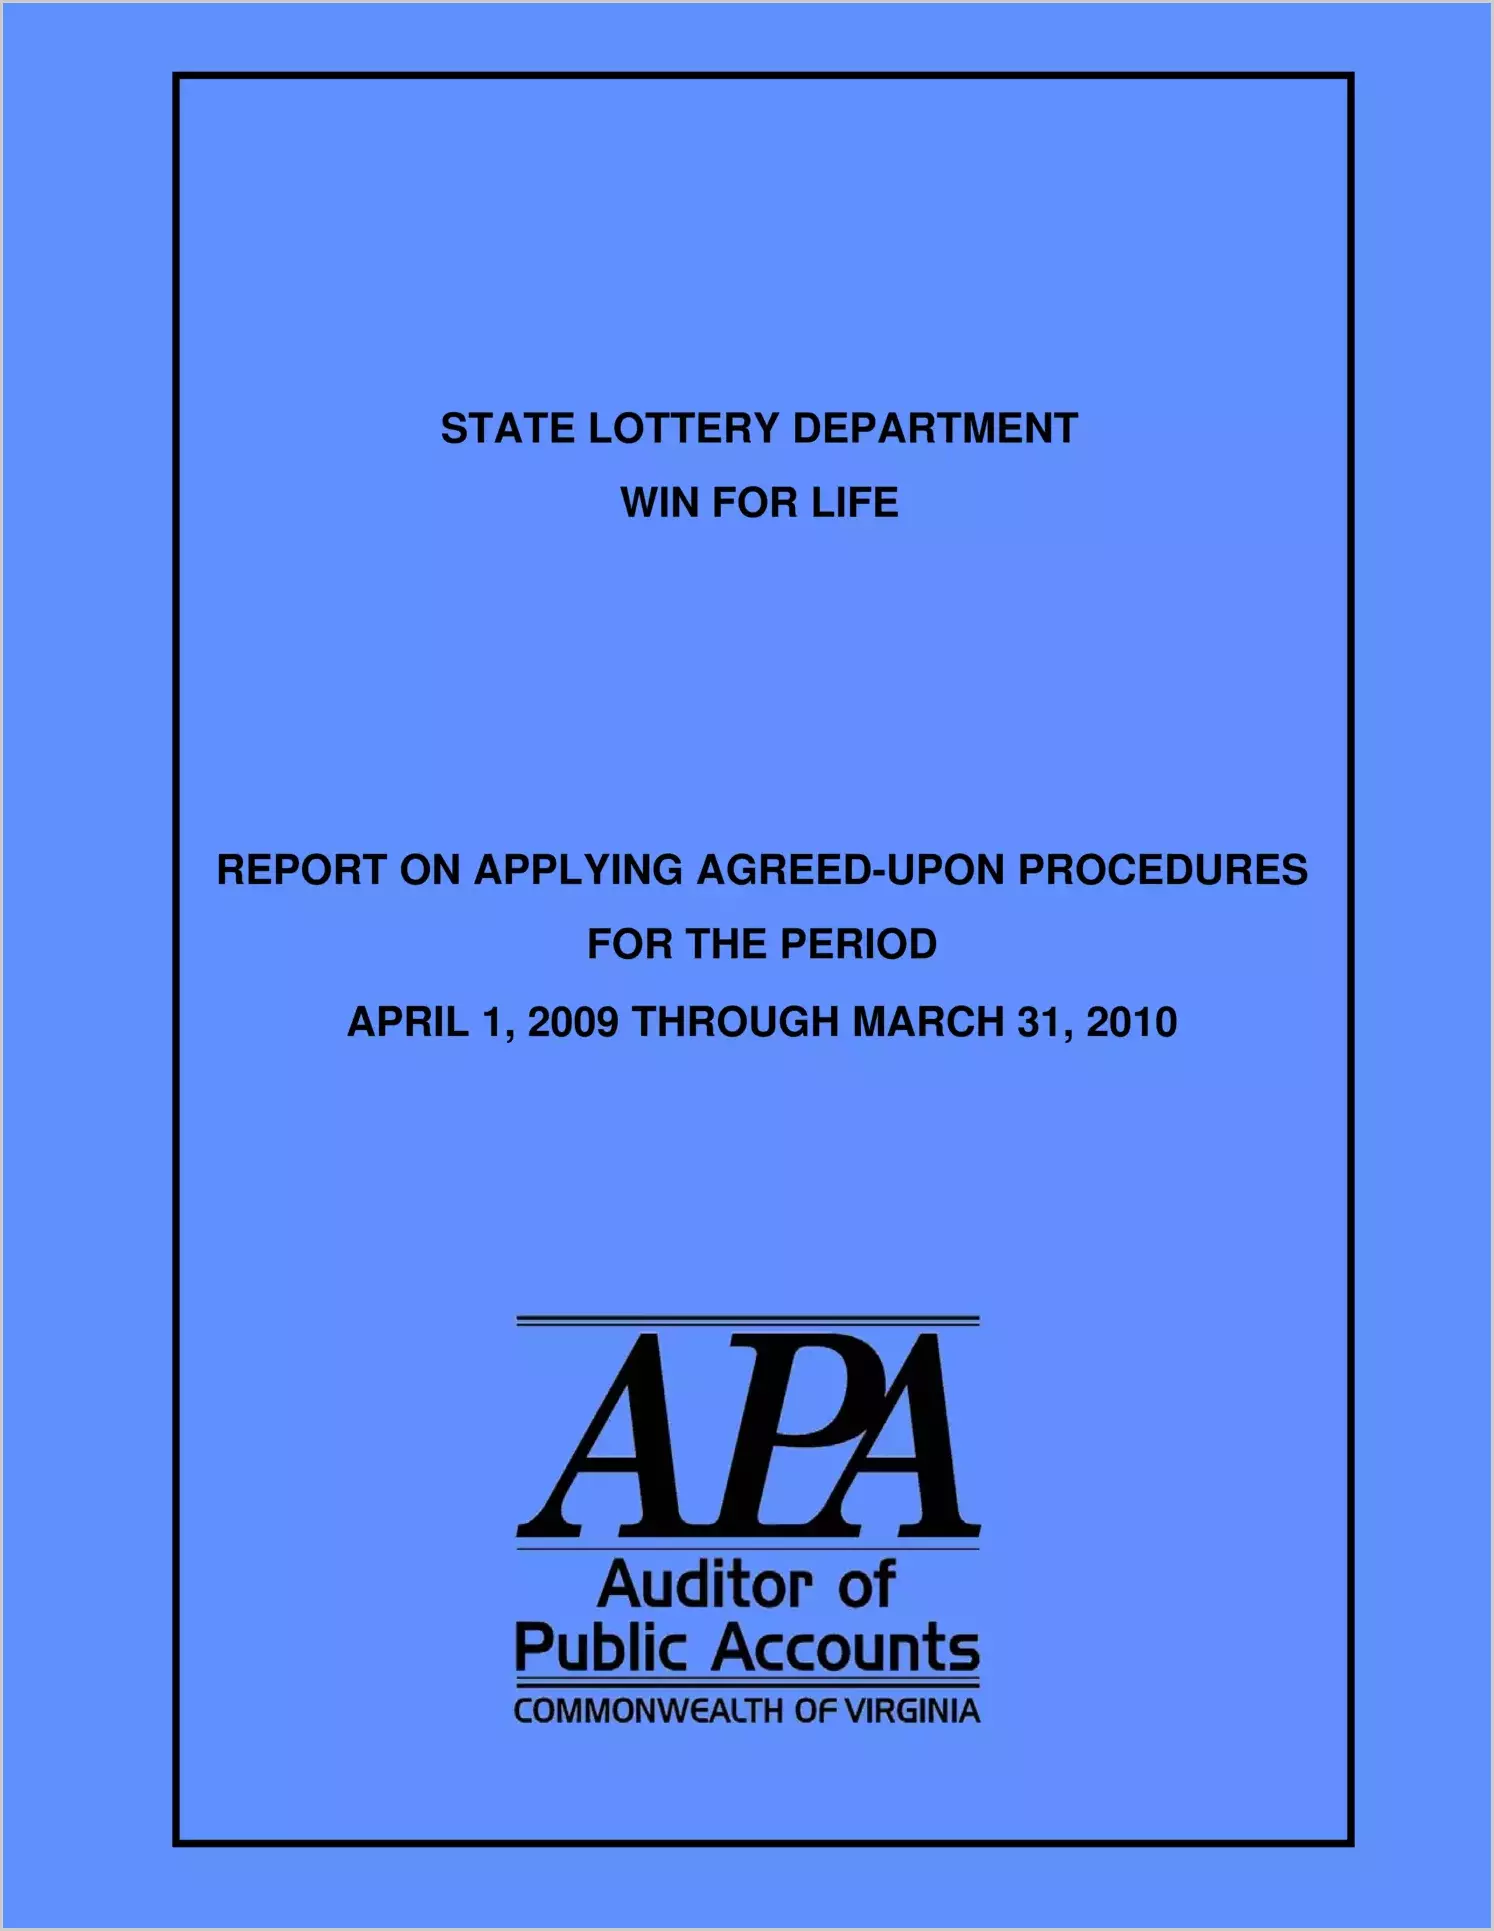 State Lottery Department Win For Life report on Applying Agreed-Upon Procedures for the period April 1, 2009throuhg March 31, 2010